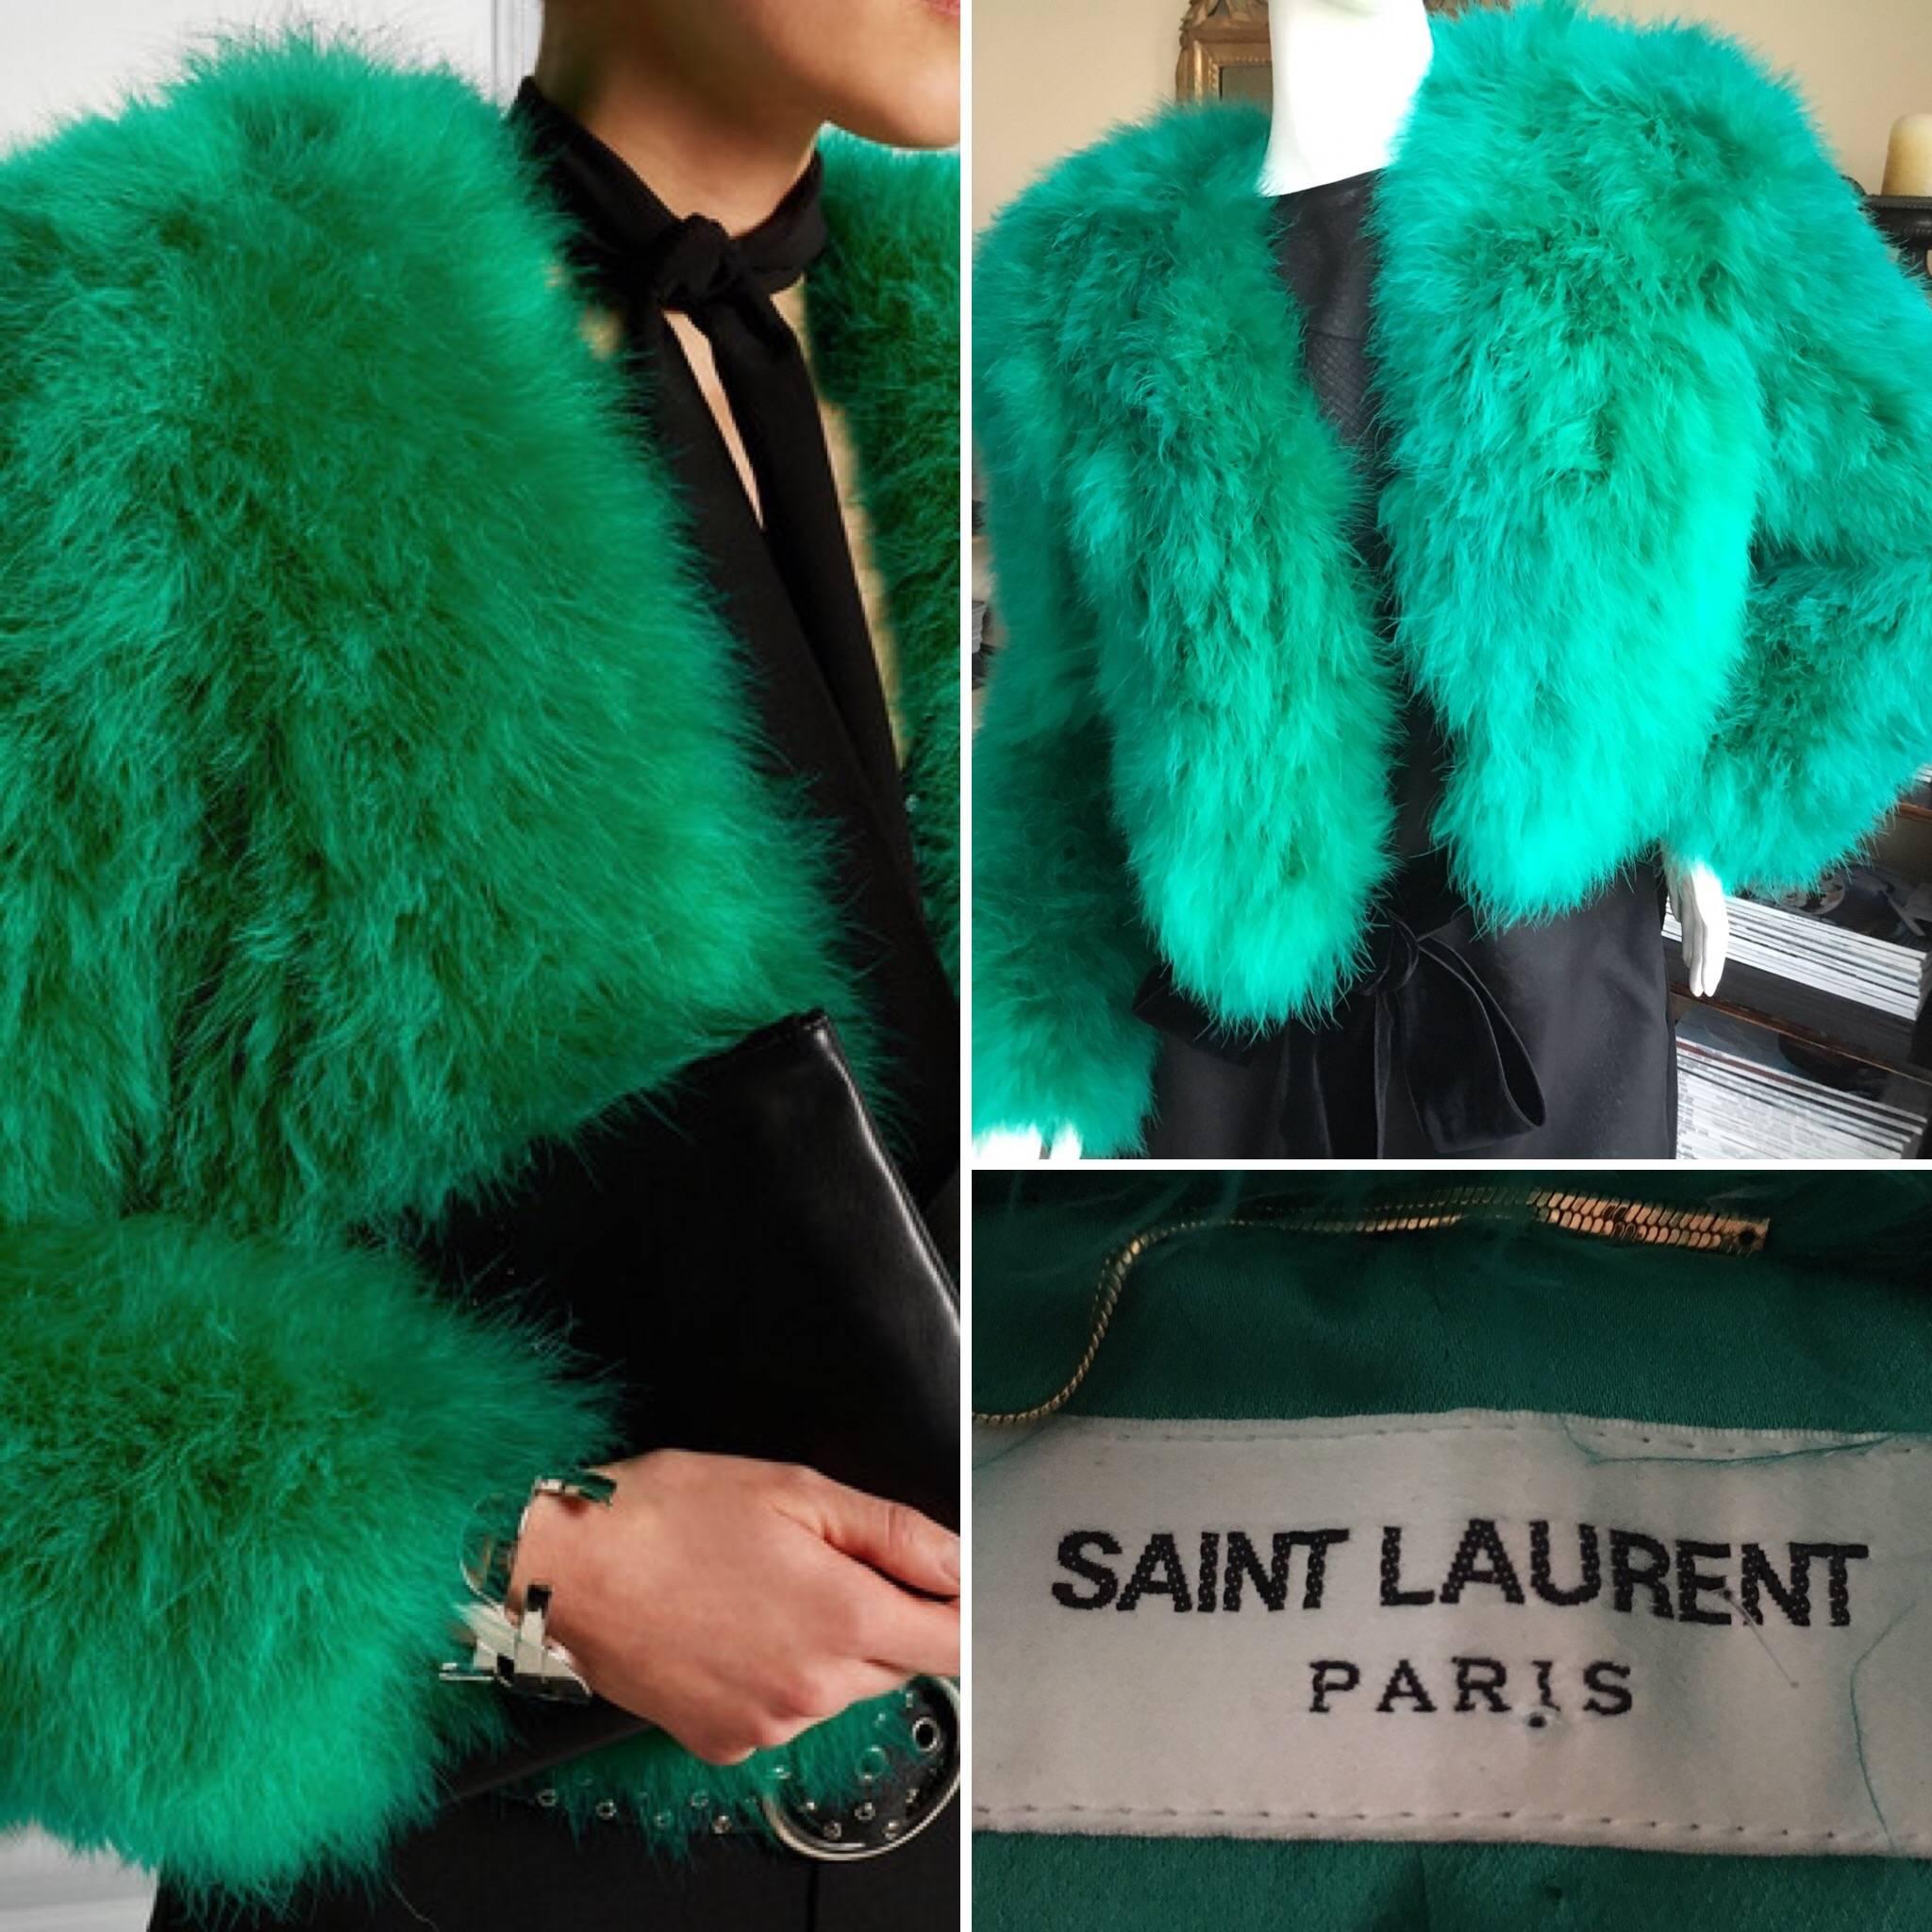  Saint Laurent by Hedi Slimane 2015 Green Turkey Feather Jacket.
Lined in green silk
New with out tags , it retailed for $5754
Made in France 
Size 38
Bust: 40"
Waist: 34"
Shoulder: 22"
Length: 21"
Sleeve: 29"